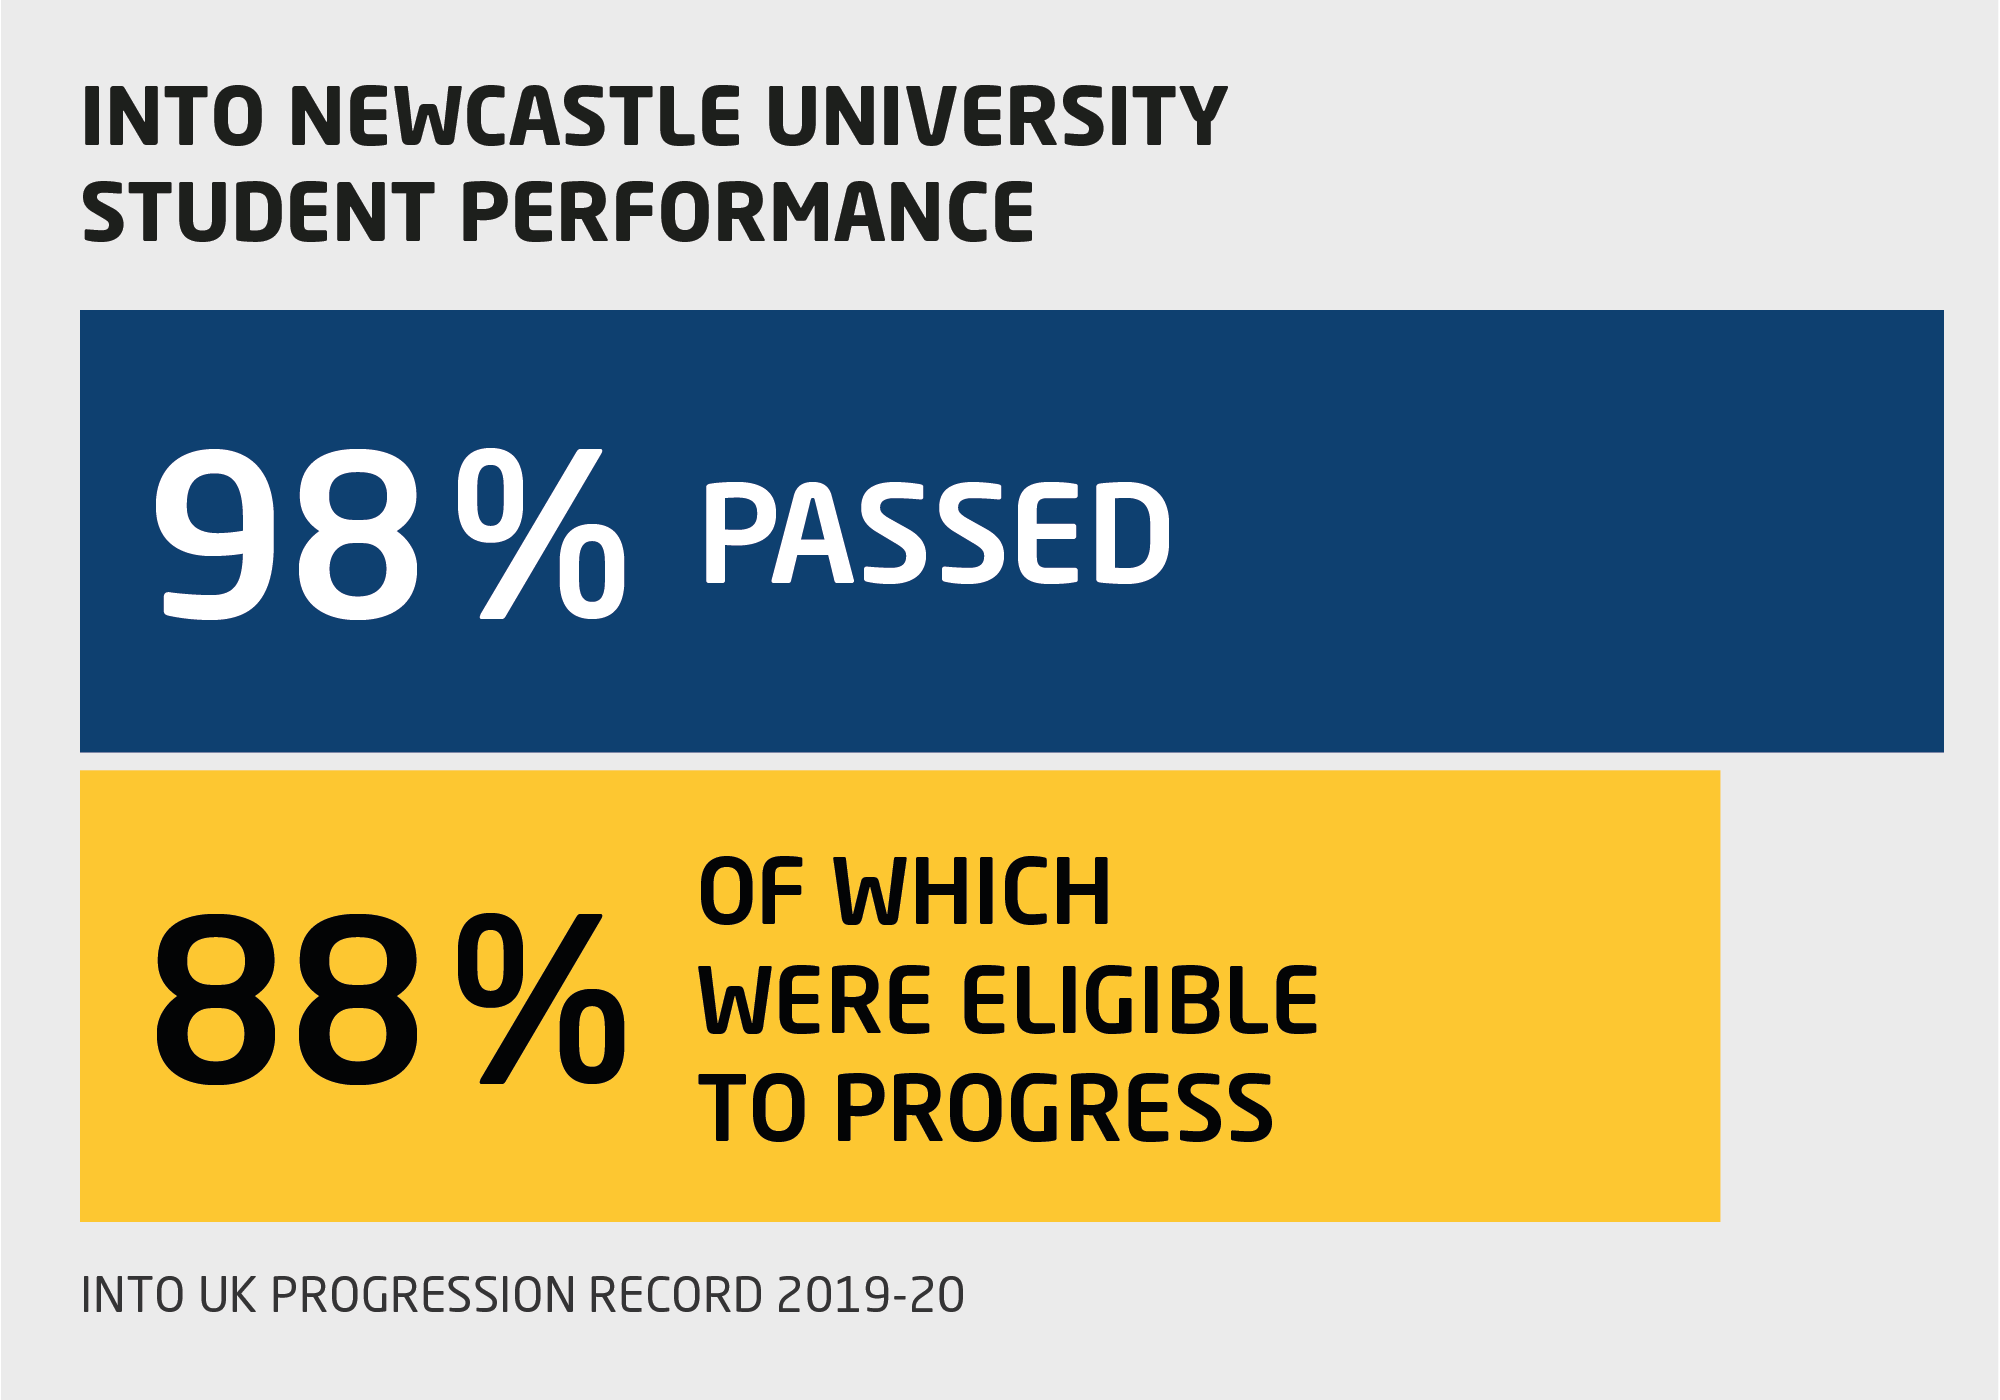 Infographic showing INTO Newcastle University student performance, with 98% passing INTO Newcastle Pathway programmes, and 88% of those eligible to progress to Newcastle degree programmes.